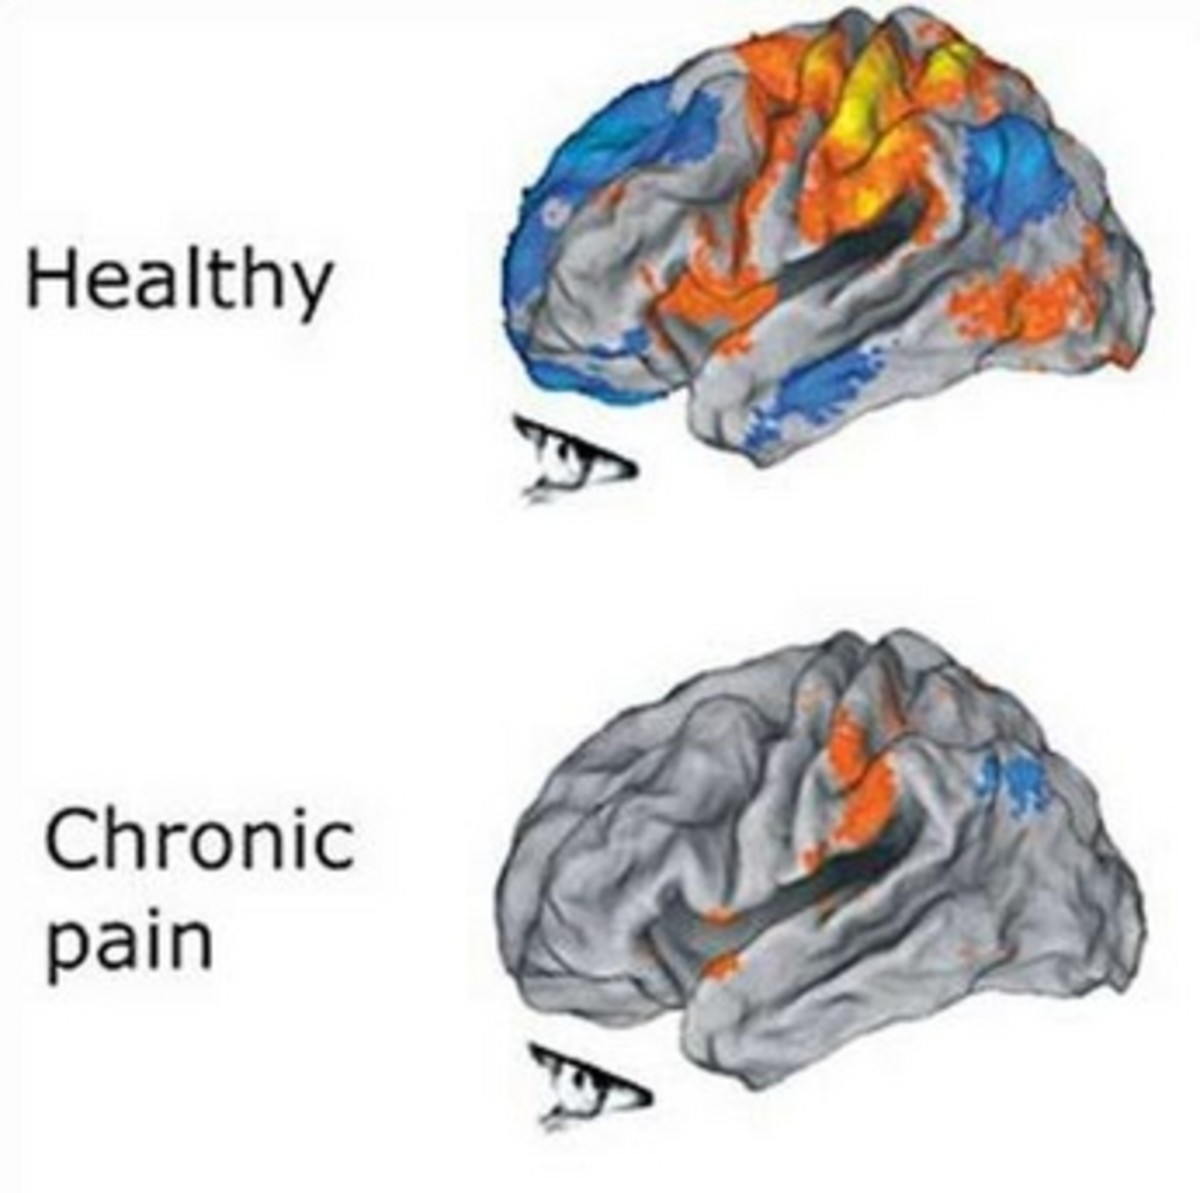 Brain- Healthy versus Chronic Pain These scans were performed at the Mayo Clinic. source Mayo Clinic